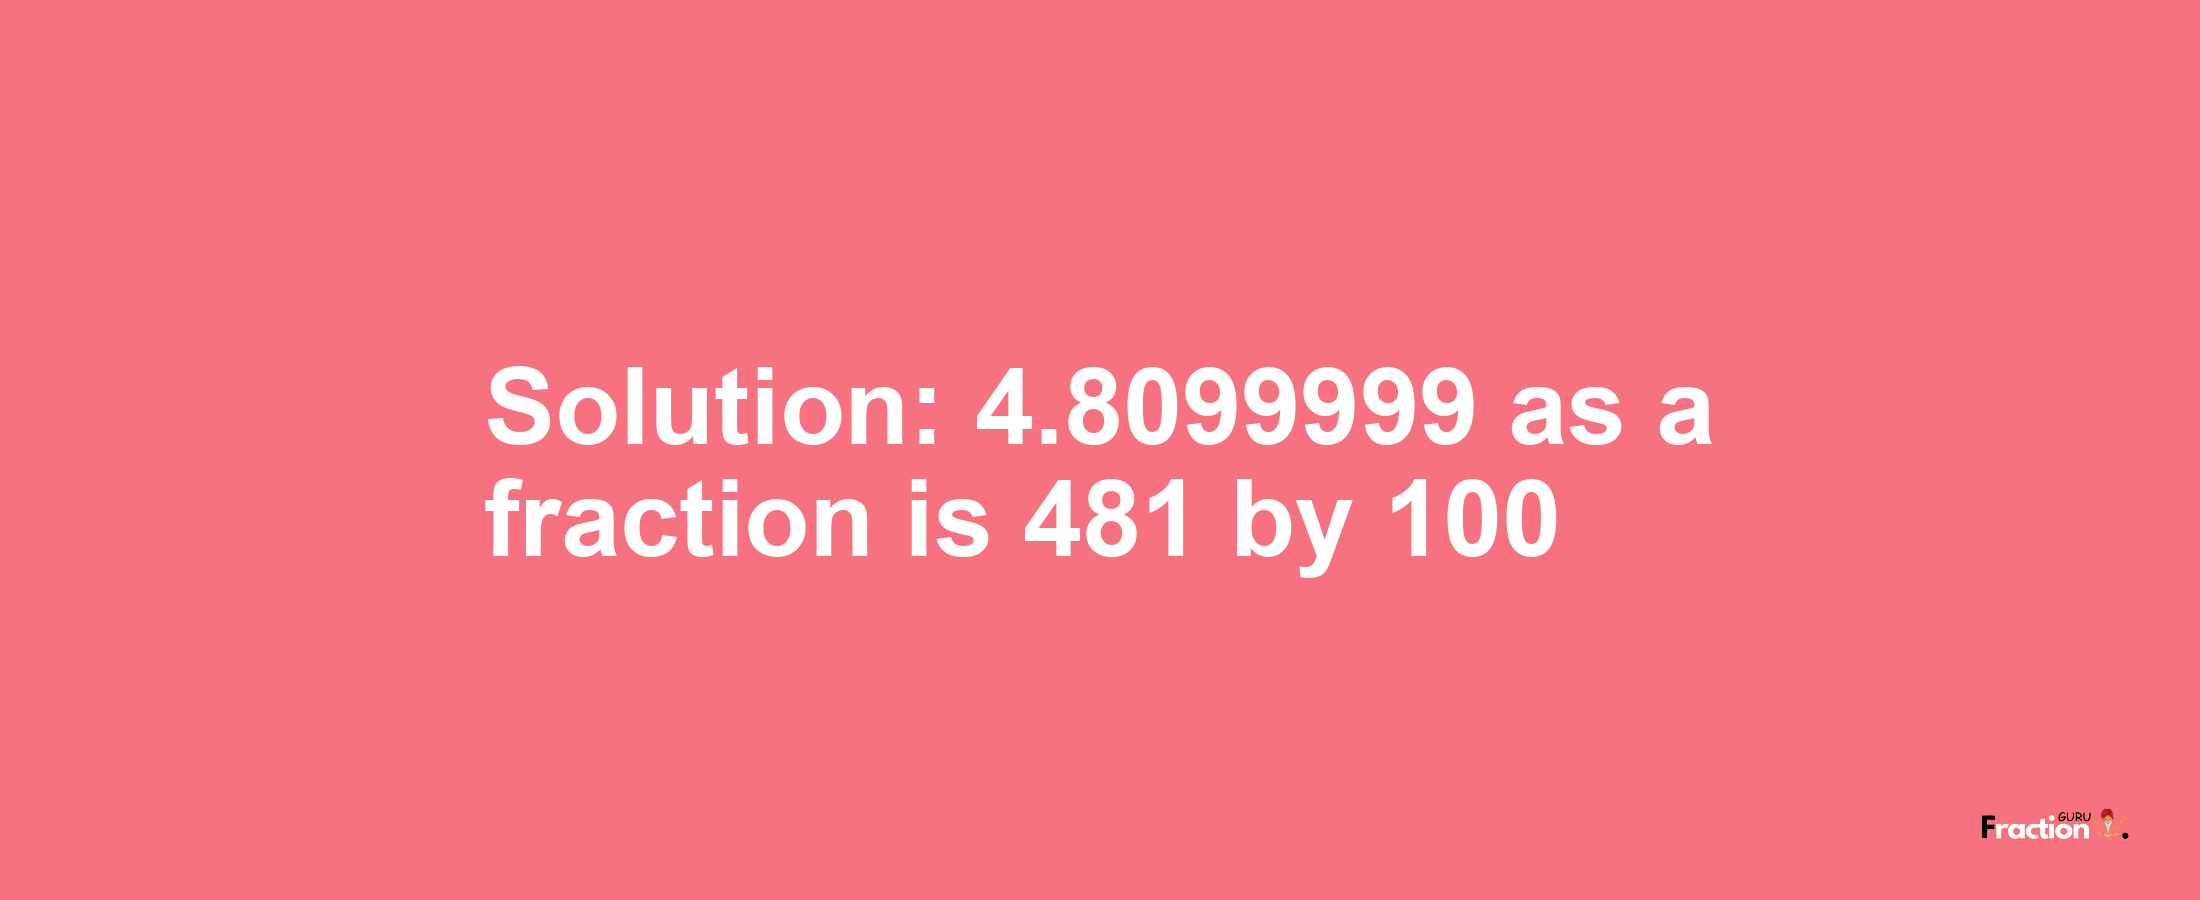 Solution:4.8099999 as a fraction is 481/100